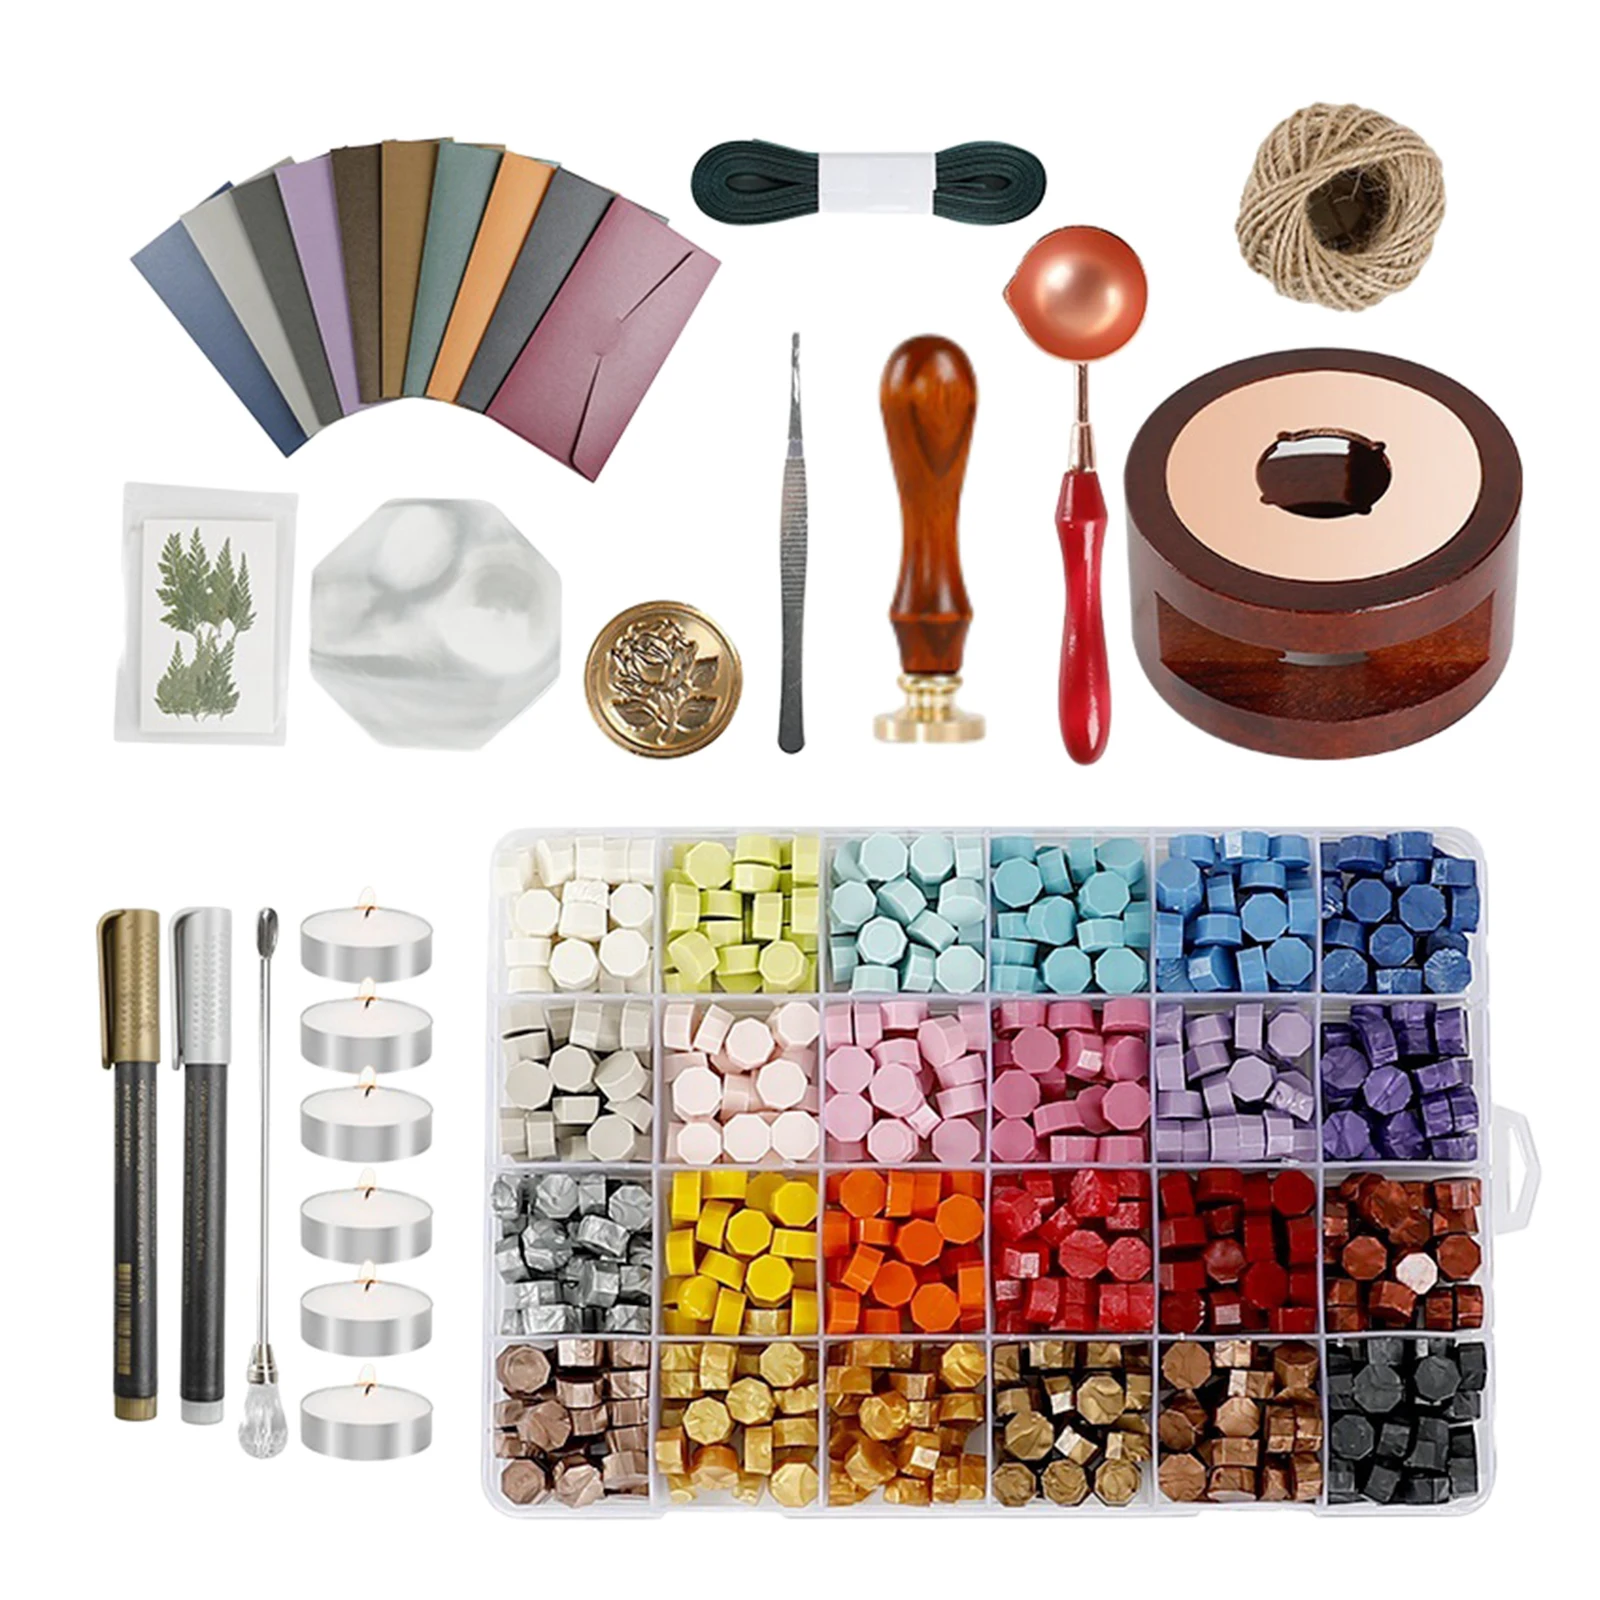 Details about   Retro Box Kit with Sealing Wax Beads Spoon Stamp Set DIY Scrapbooking Card Tool 